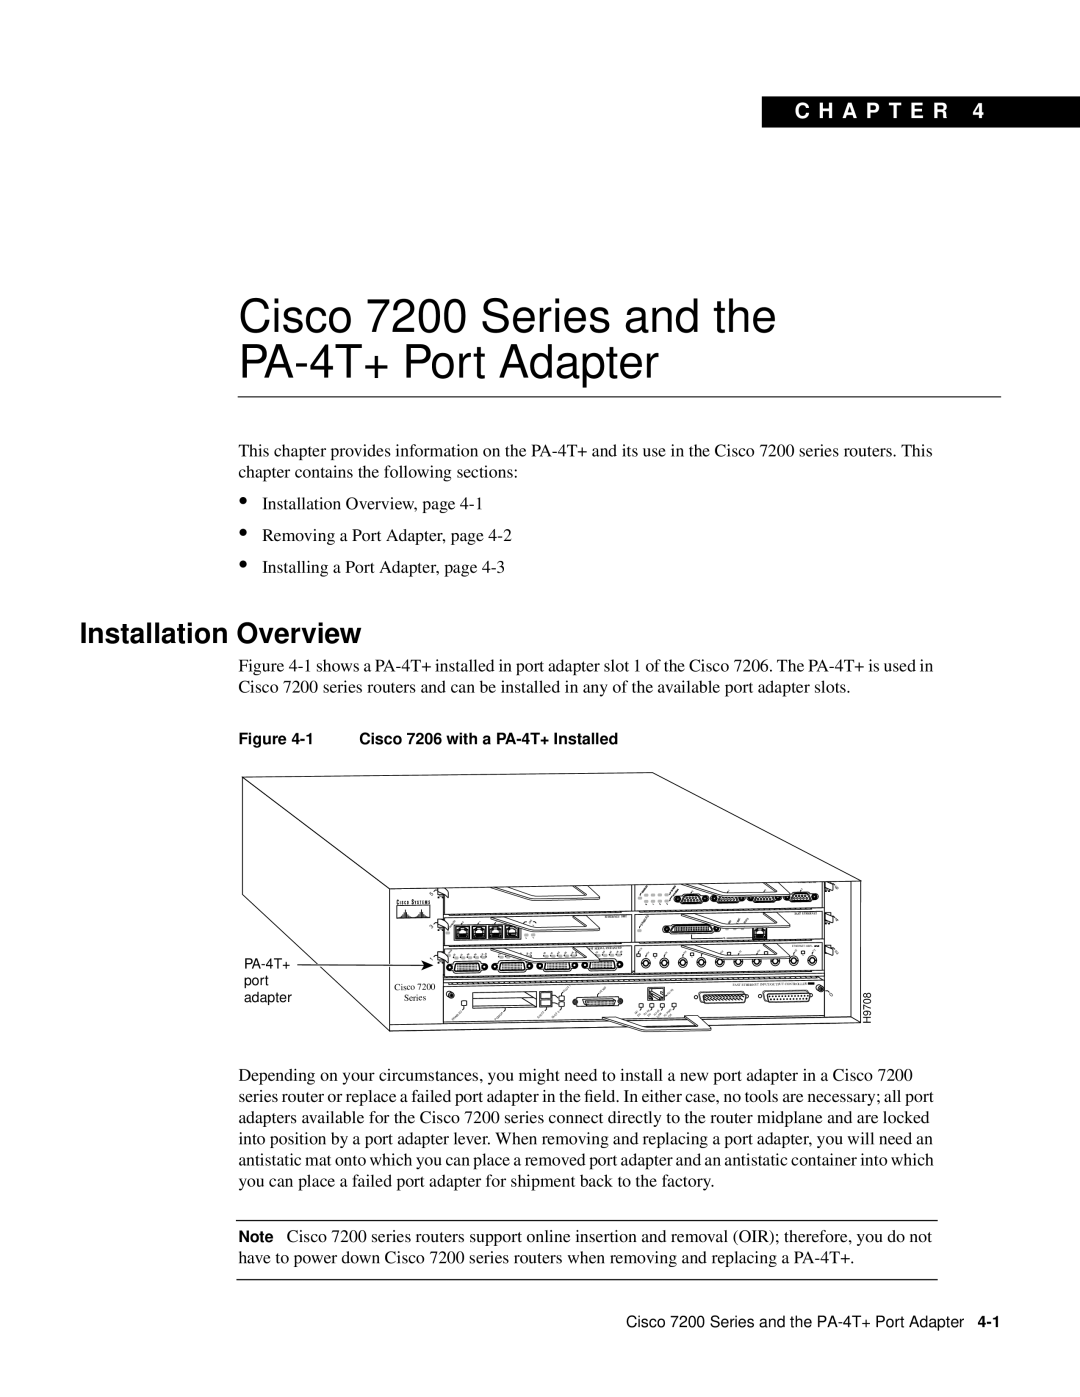 Cisco Systems manual Cisco 7200 Series and the PA-4T+ Port Adapter, Installation Overview, C H A P T E R 